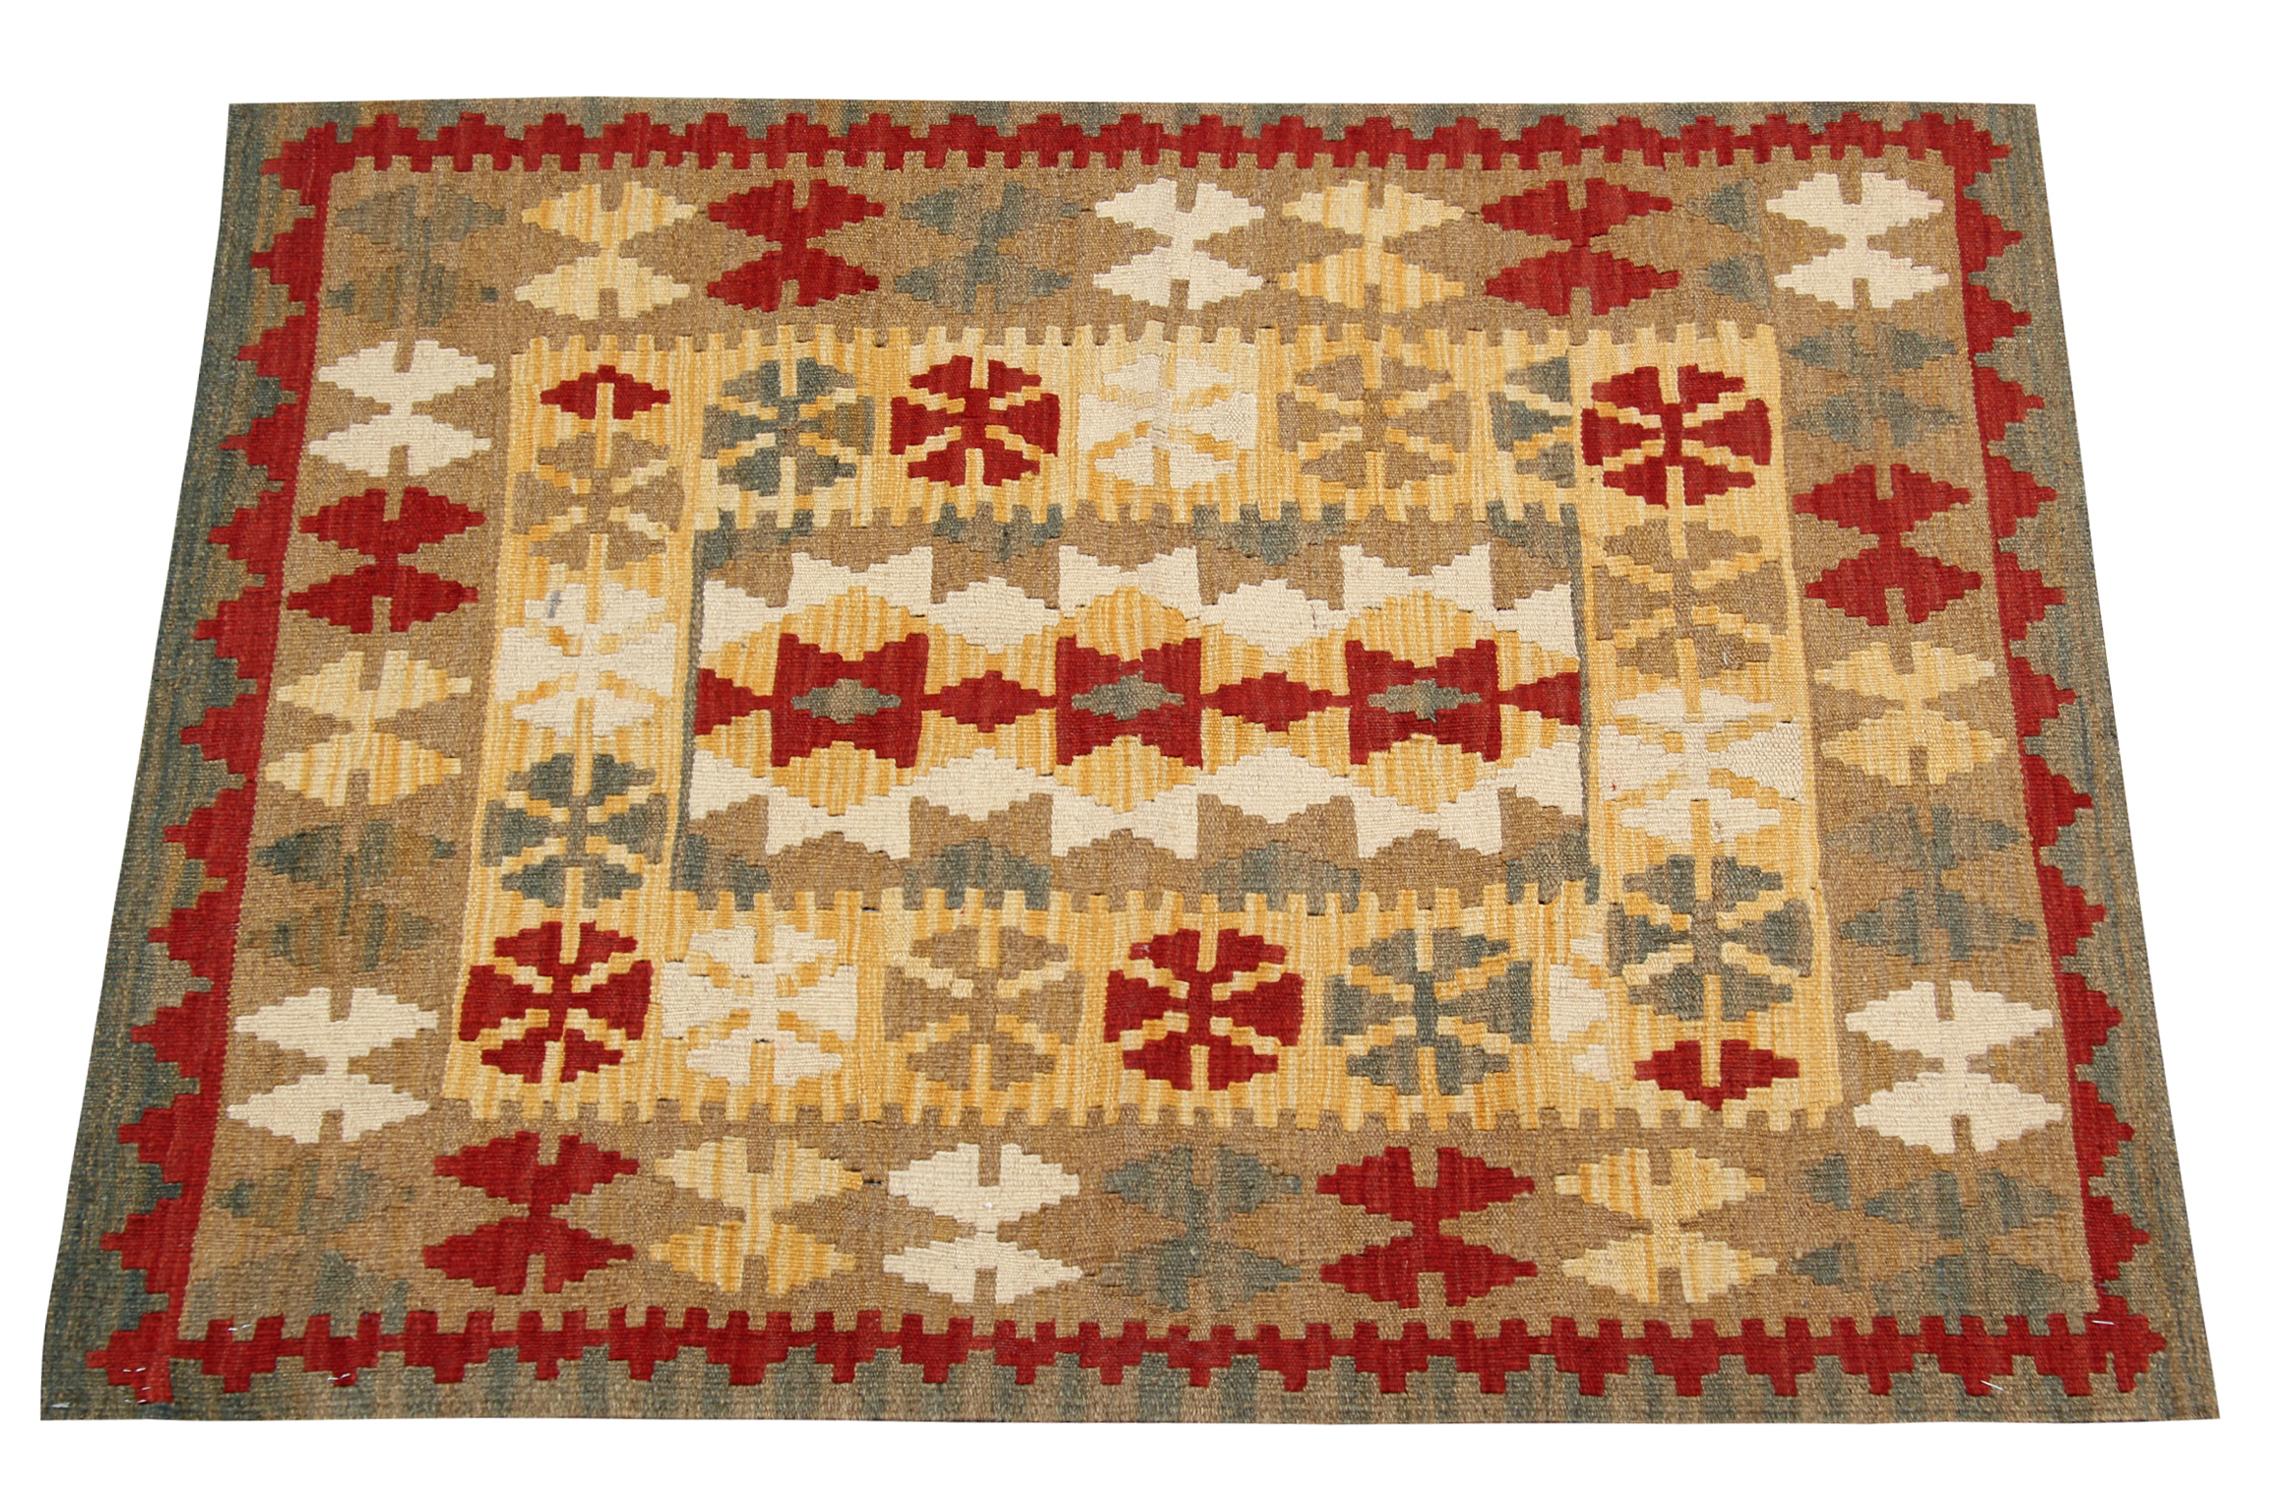 This elegant wool rug was woven by hand in the early 2000s in Afghanistan. The central design has been woven with a geometric, symmetrical pattern woven in accents of beige, red and green. Featuring tribal motifs throughout both the centre and